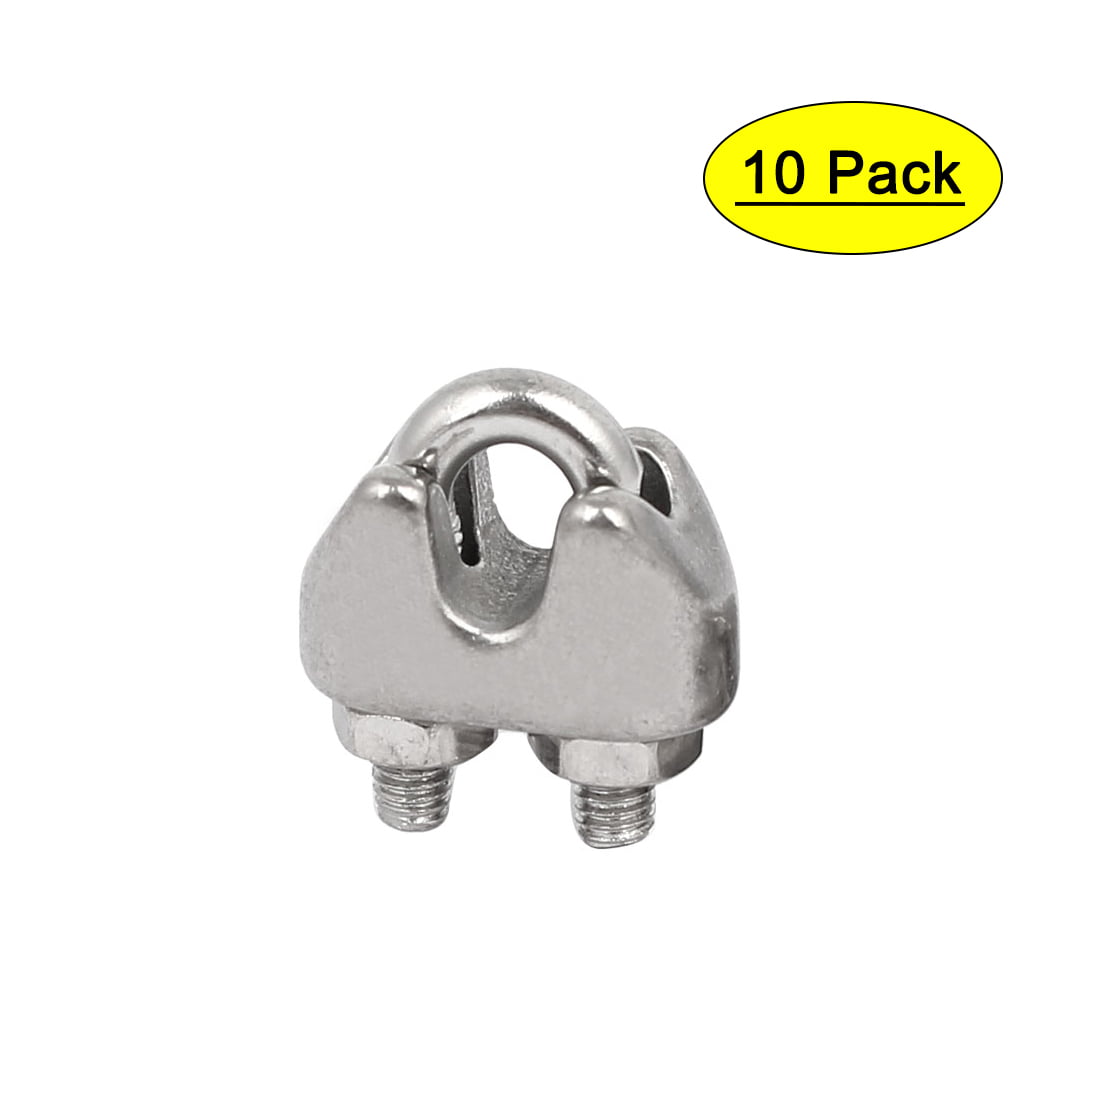 8mm 5/16" U Shaped Stainless Steel Wire Rope Cable Clamp Clips 10pcs 